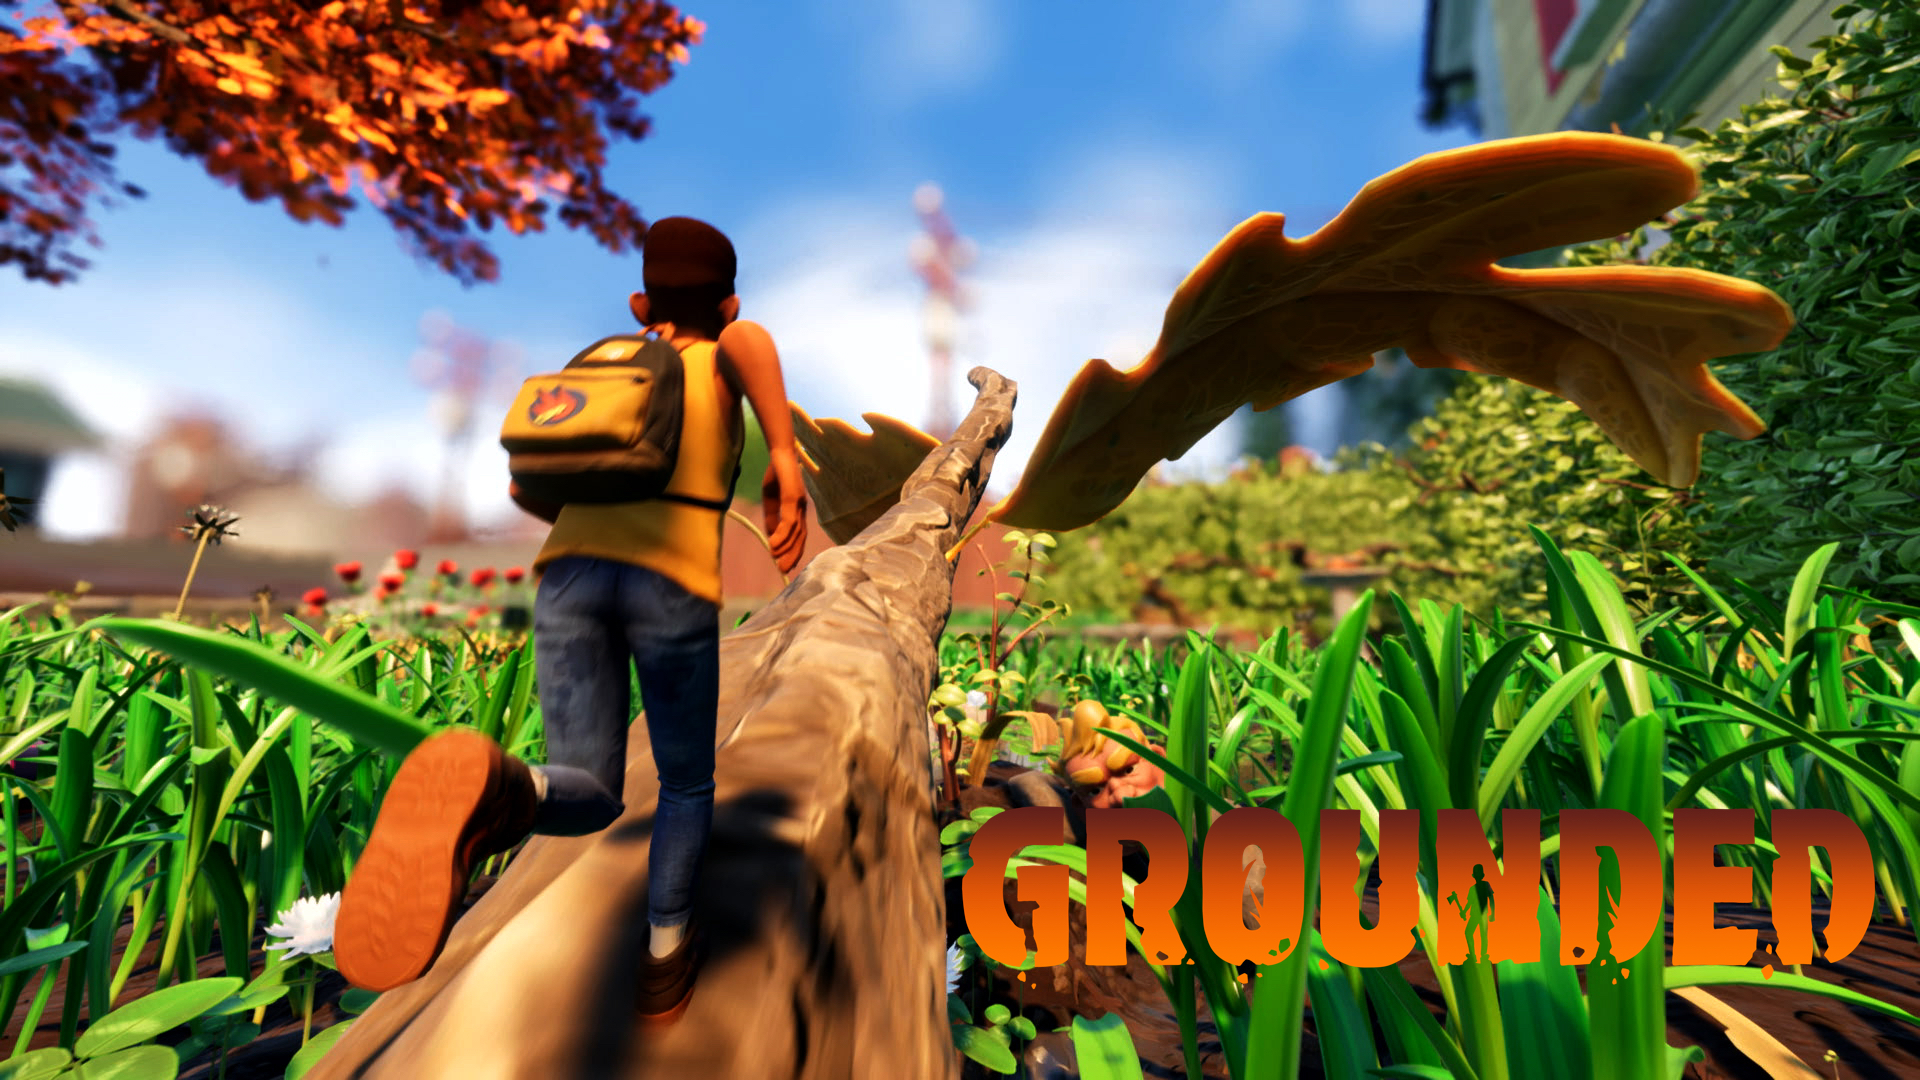 grounded release date xbox